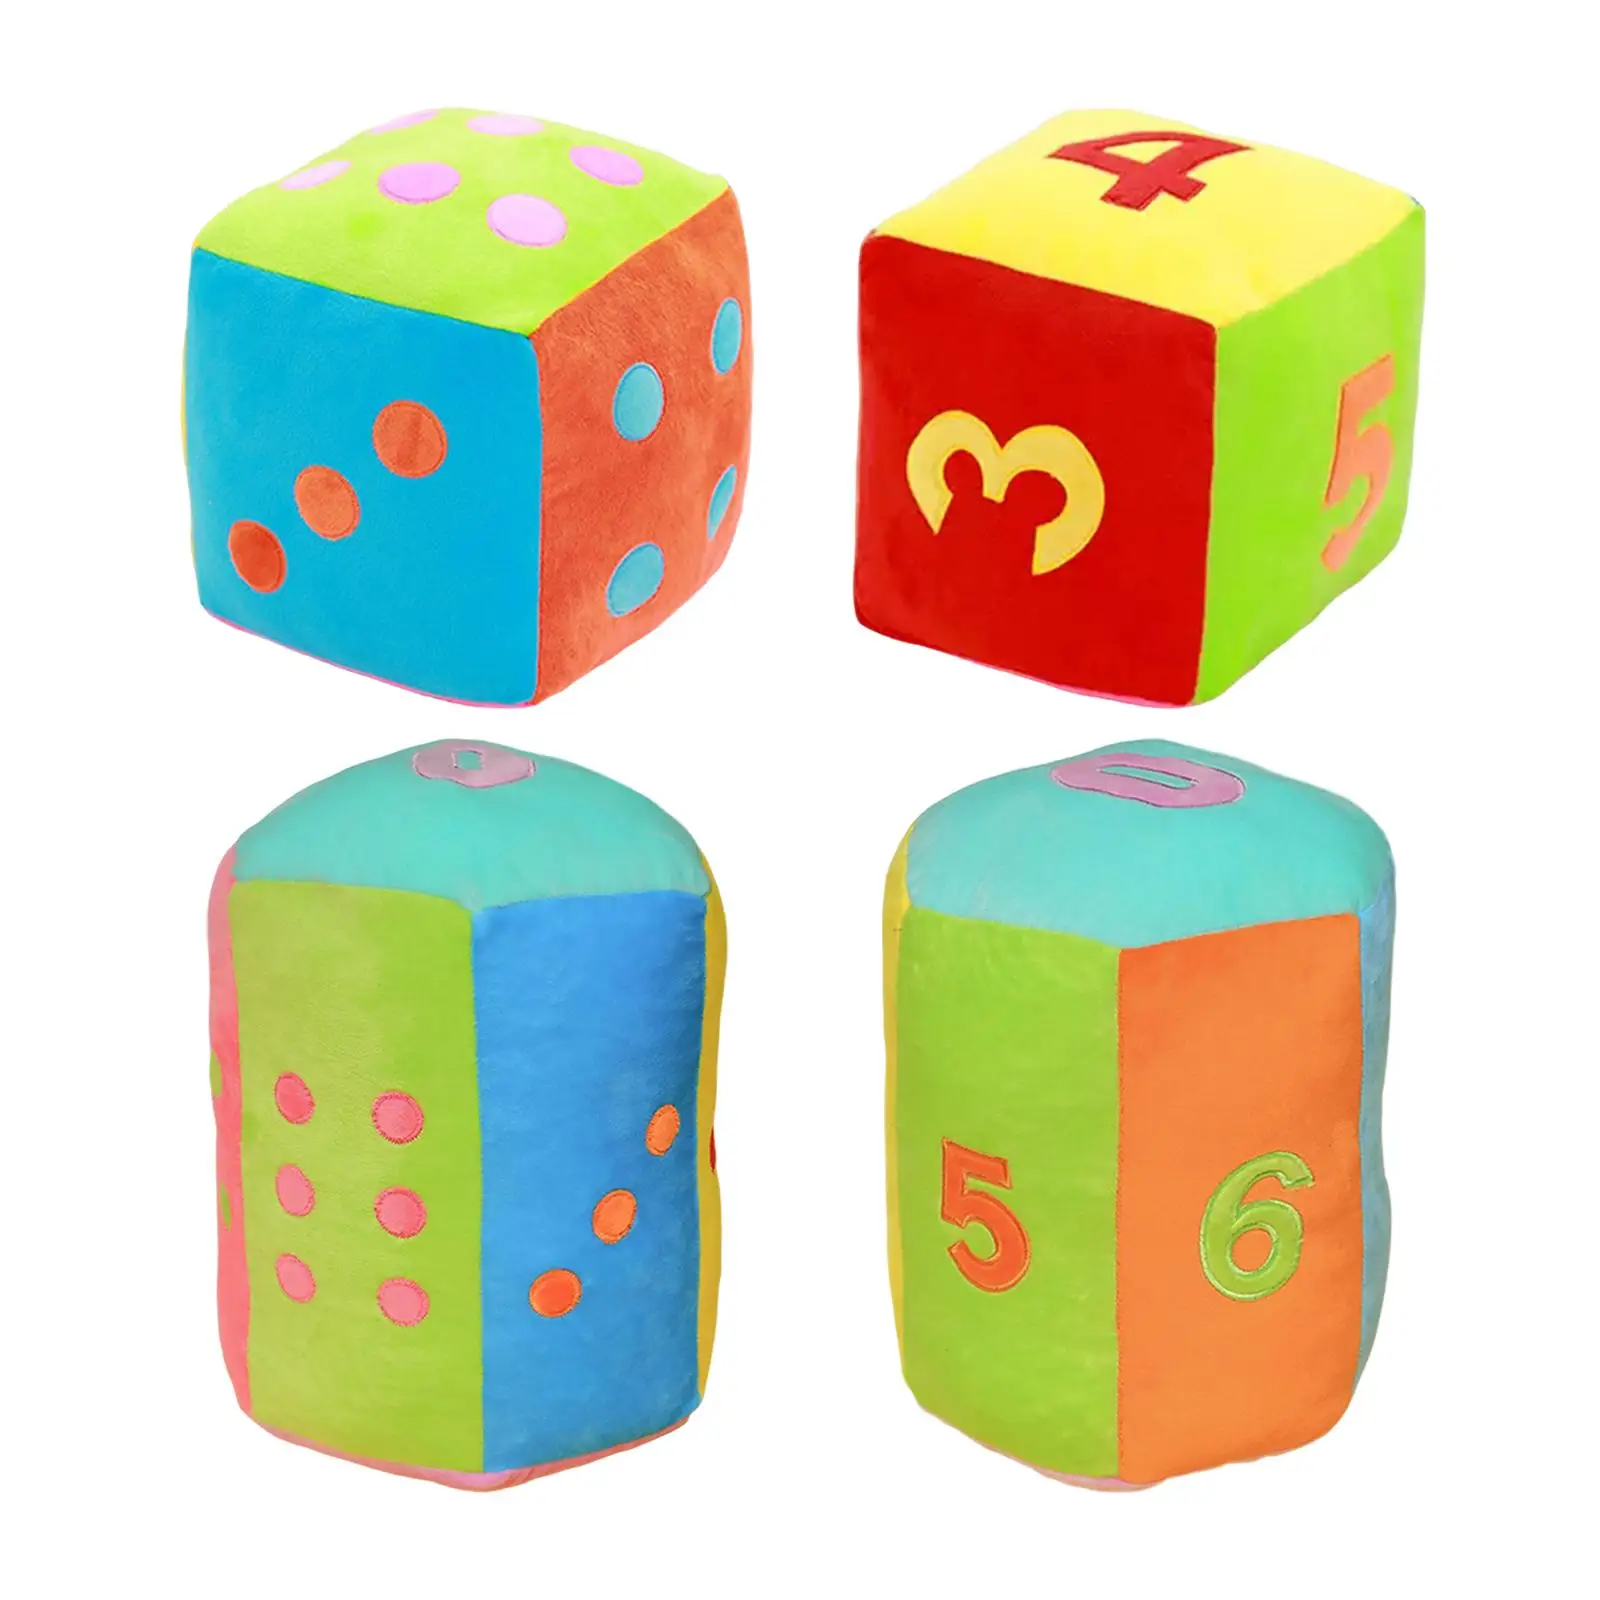 Soft Plush Dice Toy Party Suppliers Fun Playing Games Educational Party